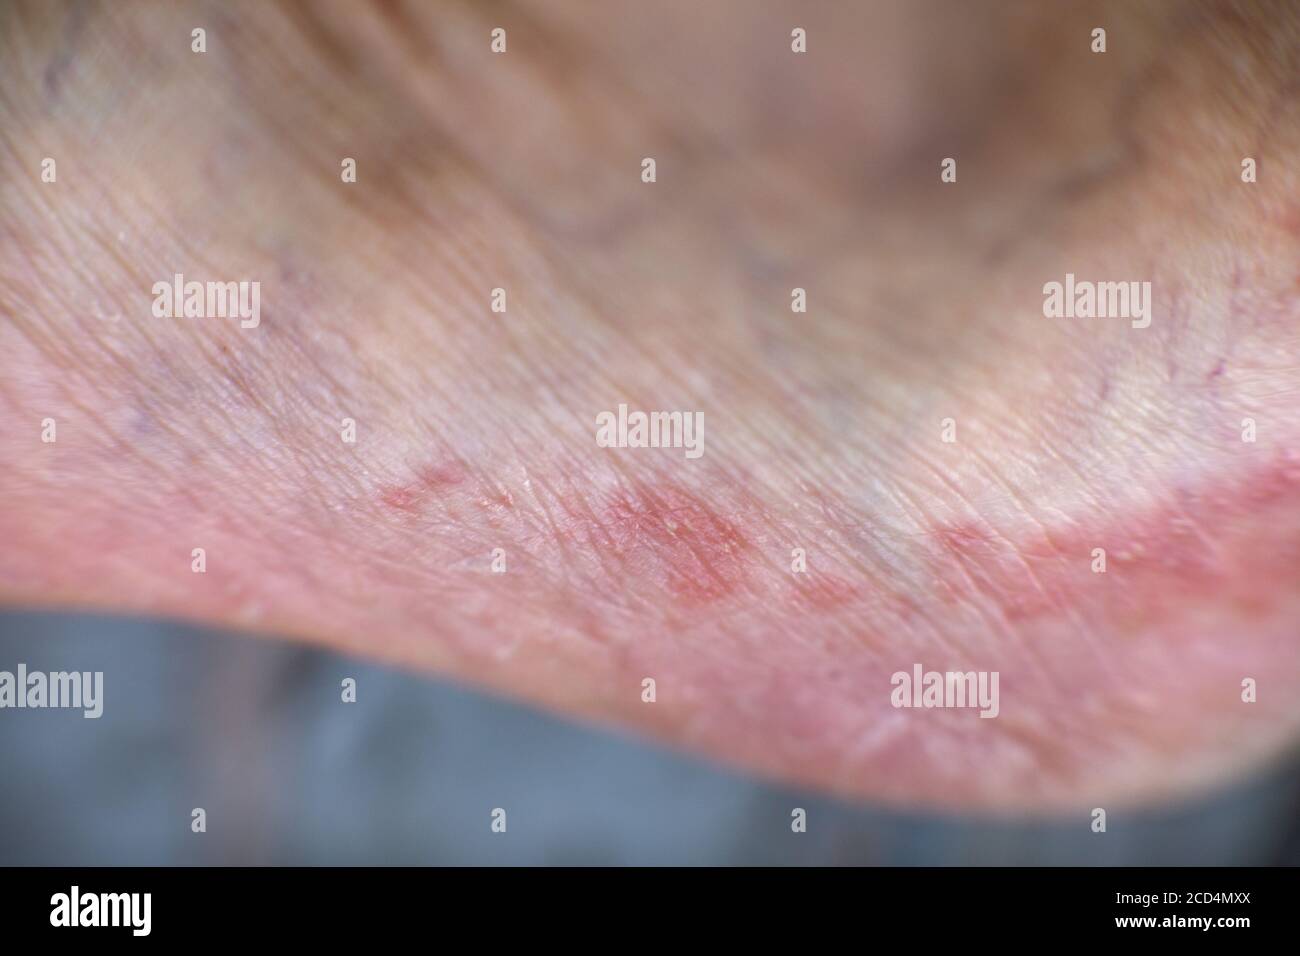 Athlete's foot, known medically as tinea pedis,  is a common skin infection of the feet caused by fungus. Stock Photo